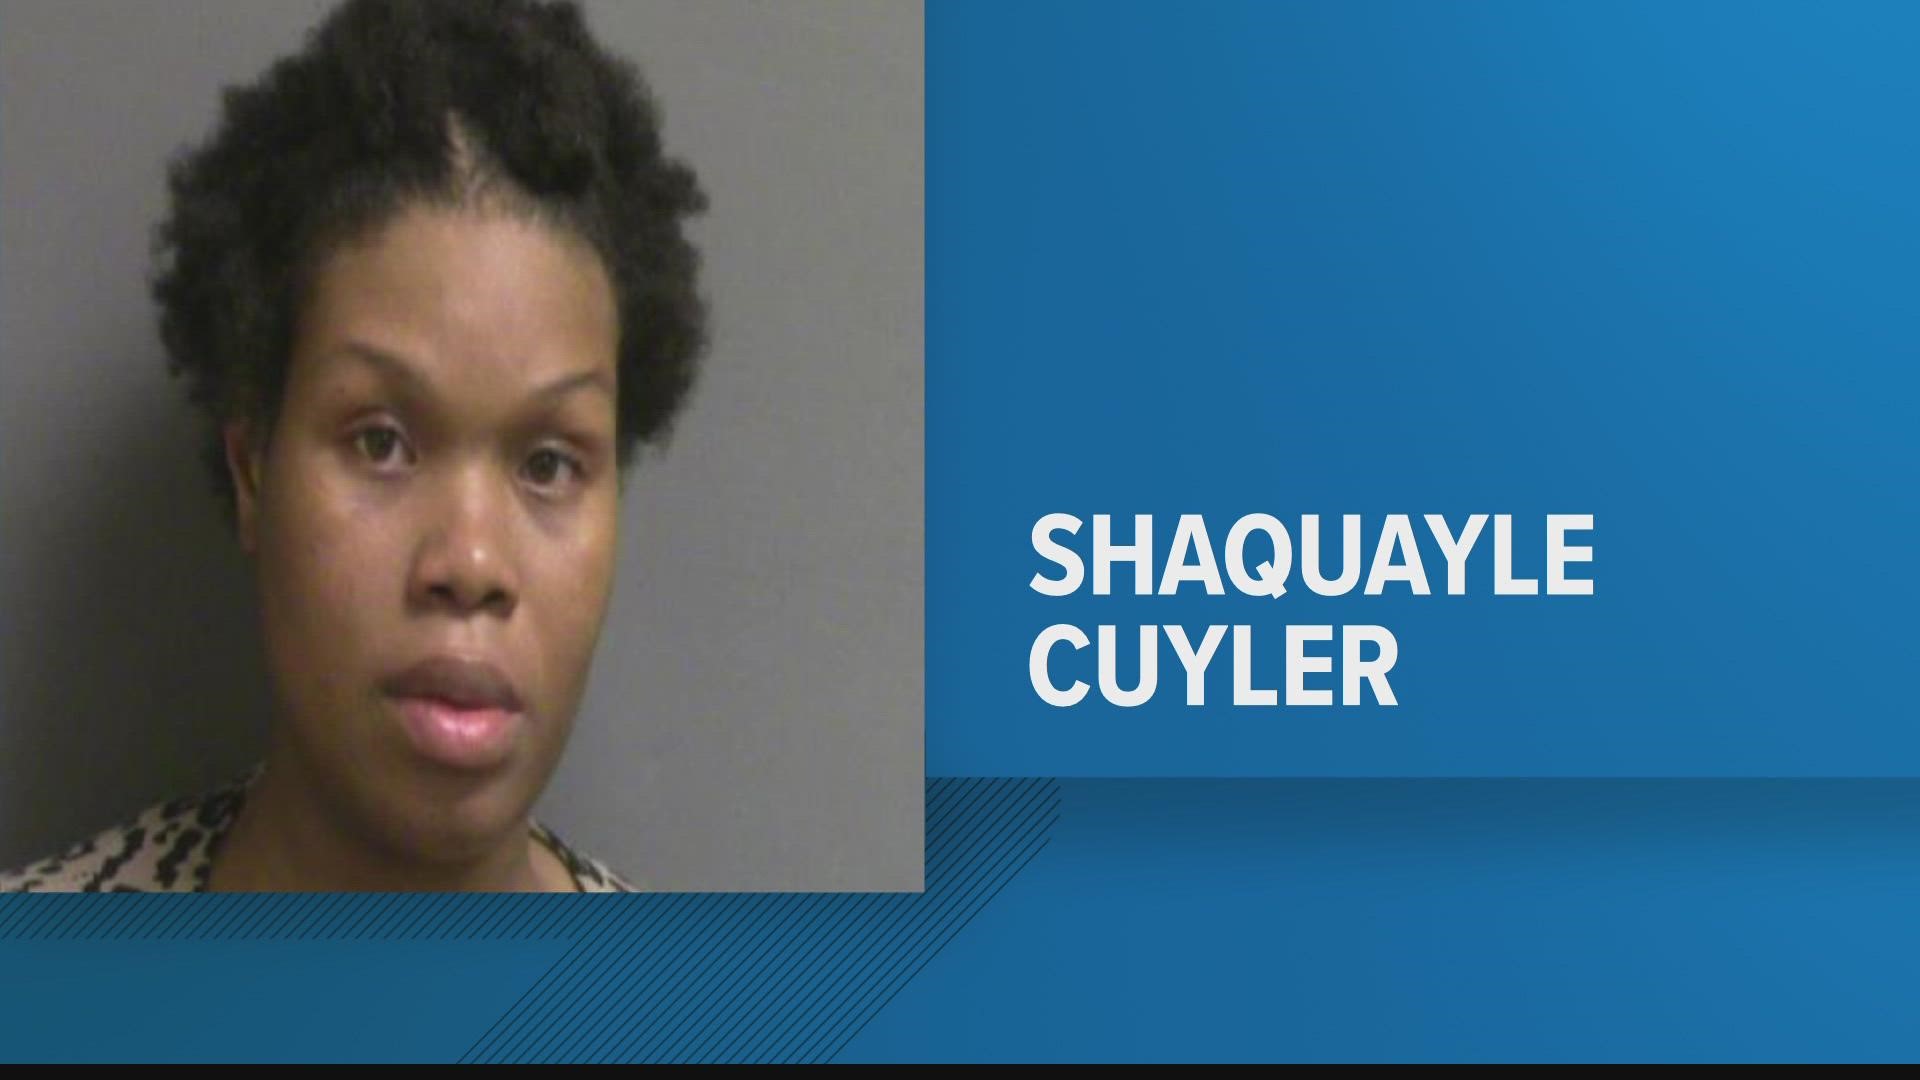 Shaquayle Cuyler, 29, is accused of deploying a can of pepper spray on a Glynn County school bus Tuesday morning. Twenty-four children were treated.